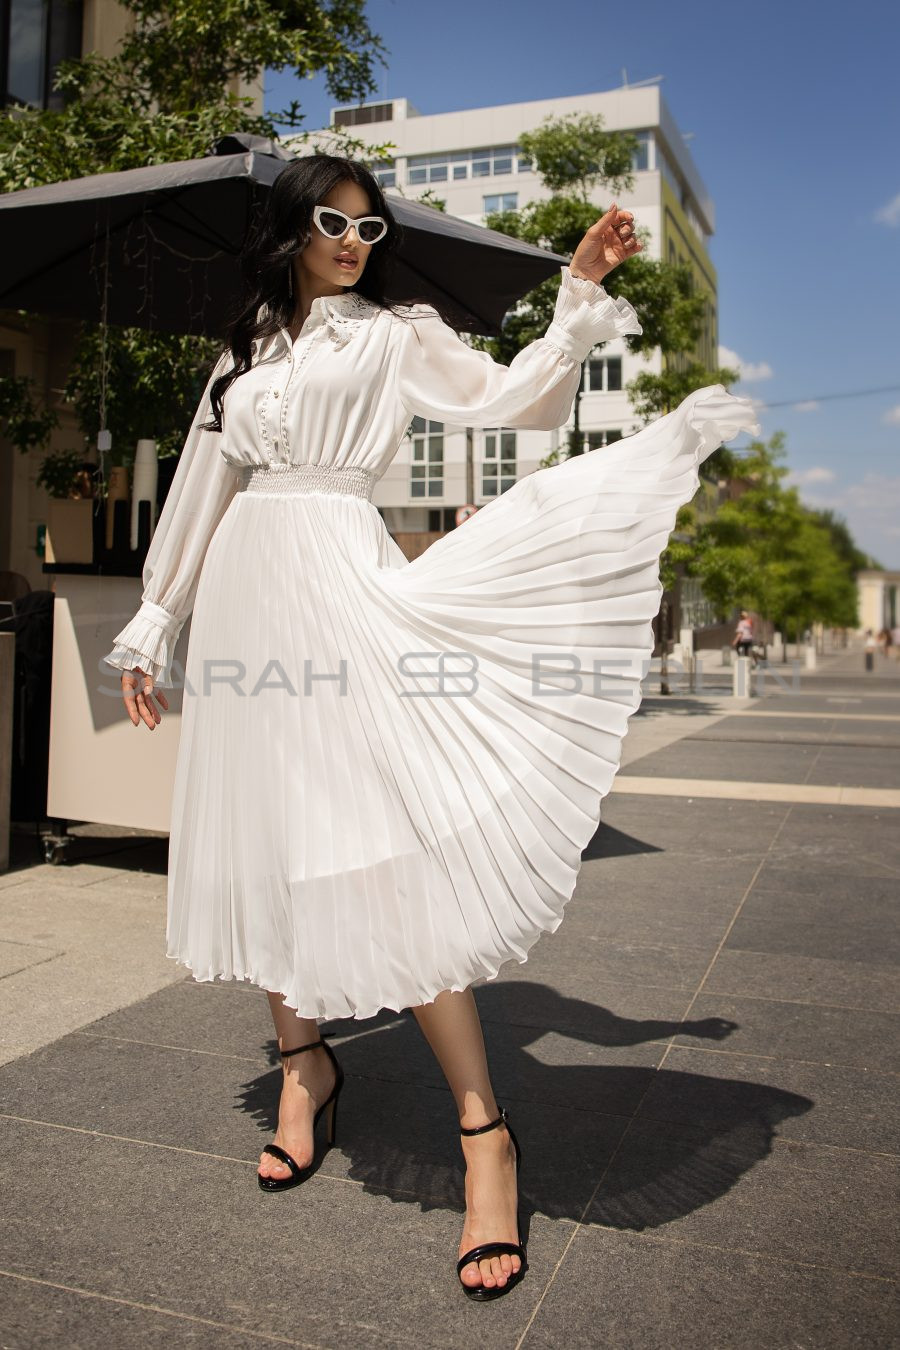 Chiffon pleated dress with lace collar